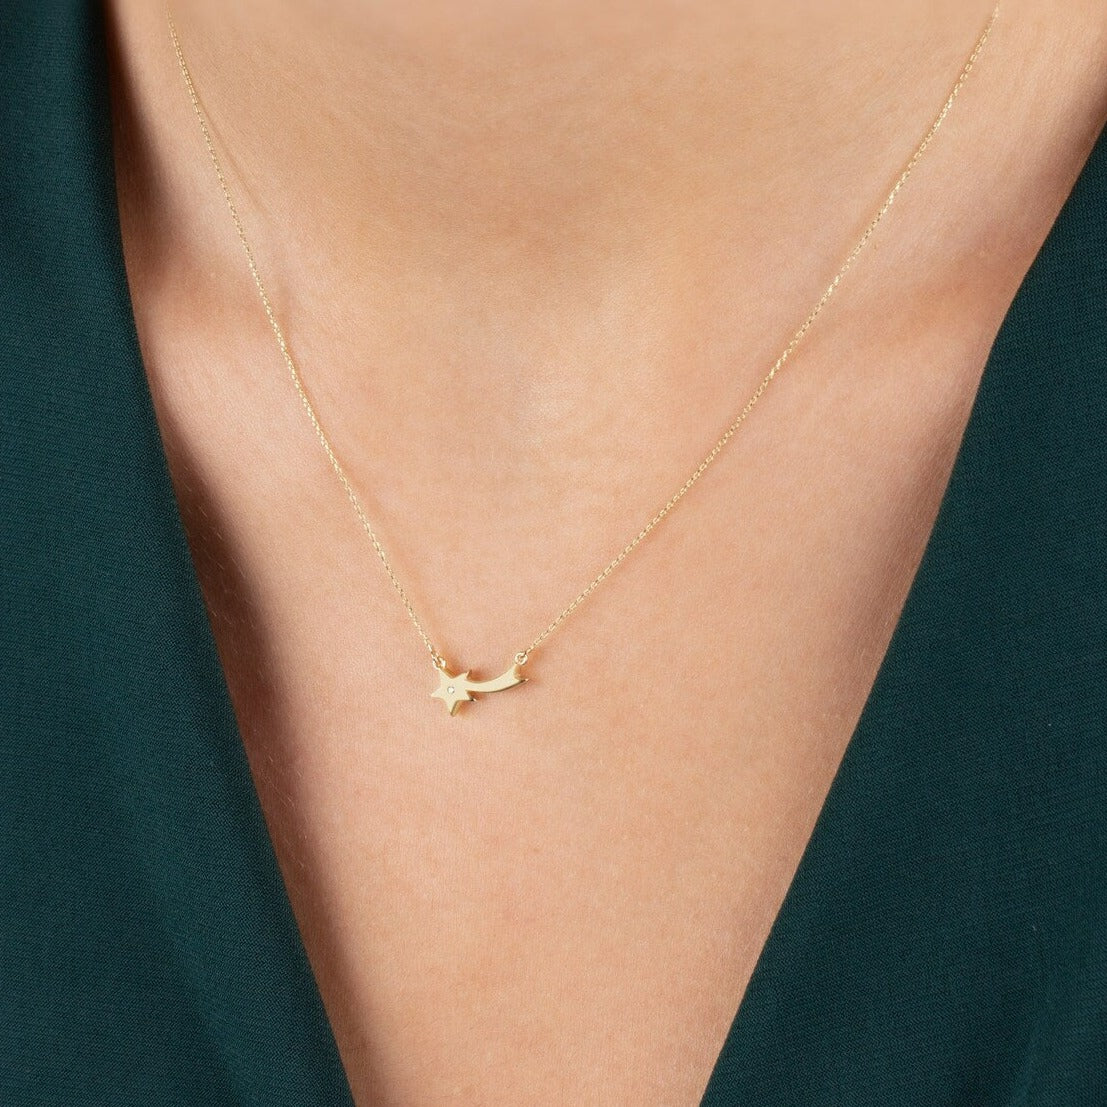 18 Carat Gold Shooting Star Necklace - Personalized brilliance and celestial allure, symbolizing starlit connections in the heart of the UAE.